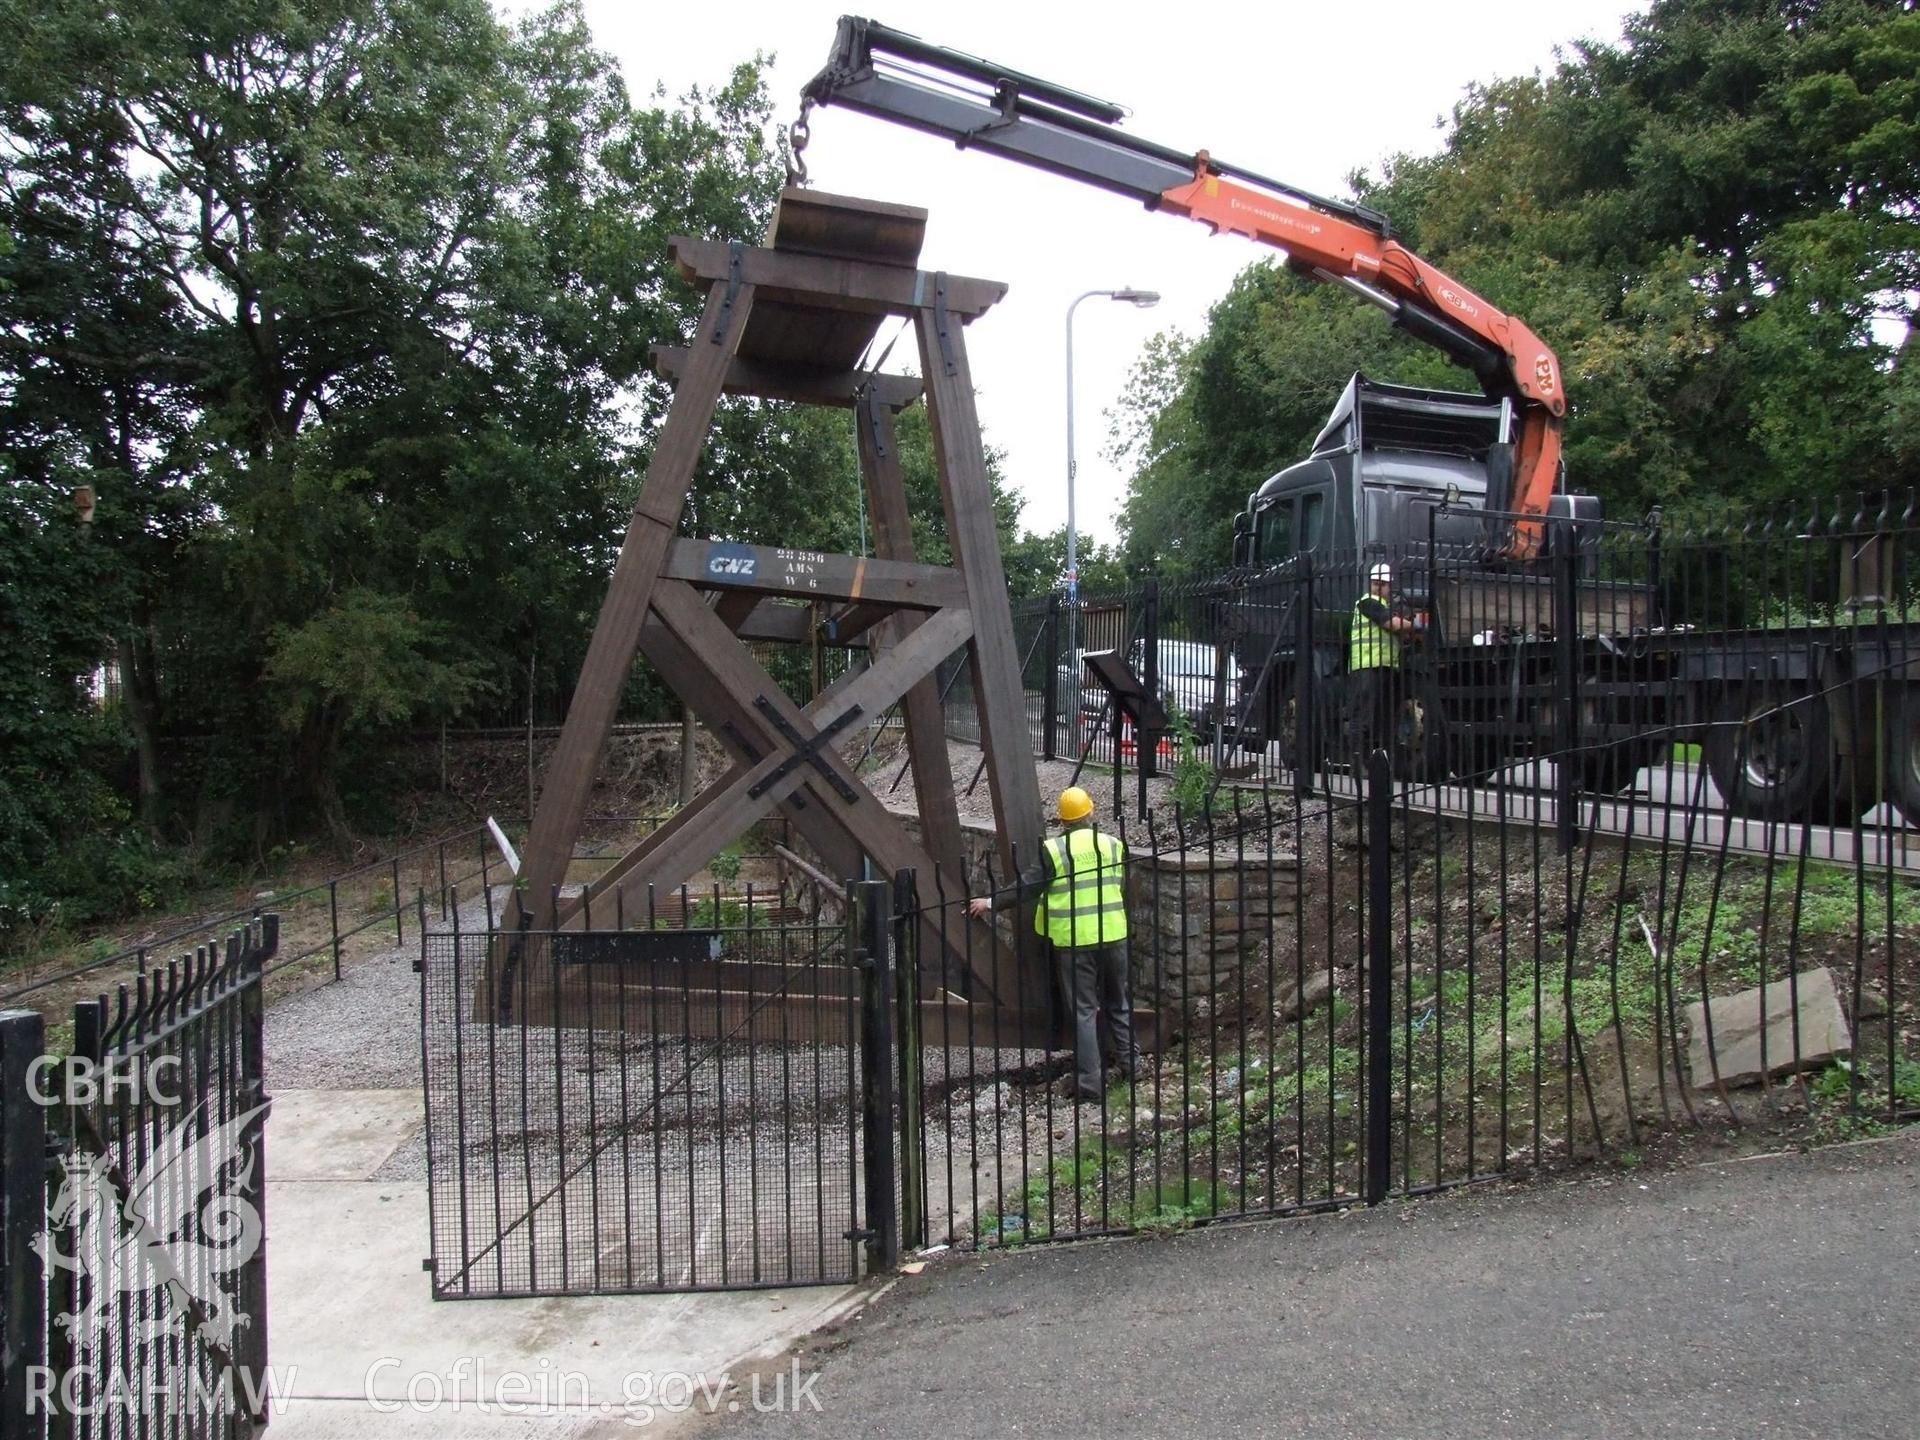 Digital image relating to Melingriffith Water Pump: Replacement A-frame being lowered to temporary location in advance of main lift.